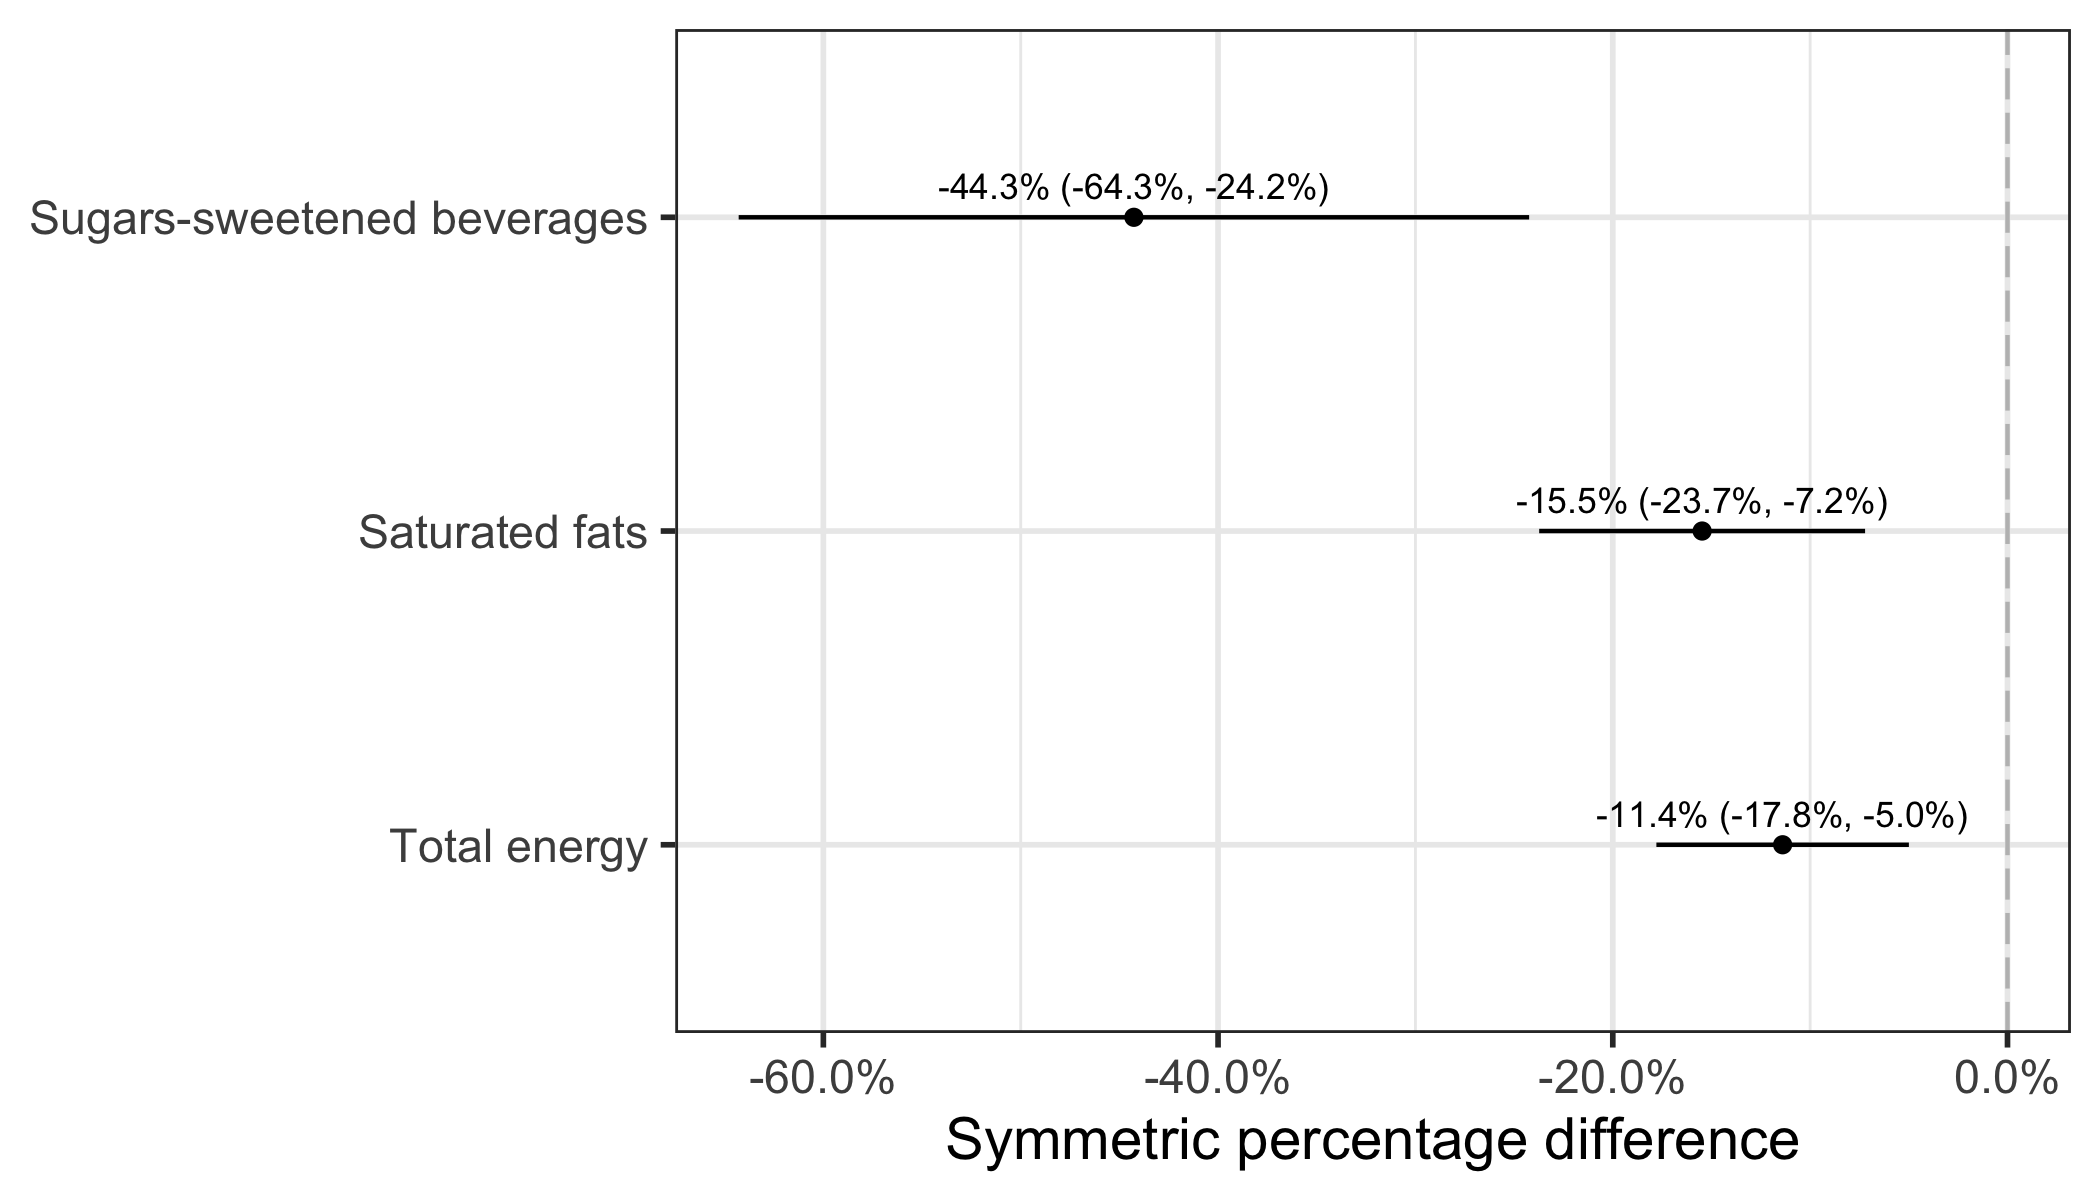 Figure 2: Symmetric percentage difference of mean food and nutrient intakes between groups